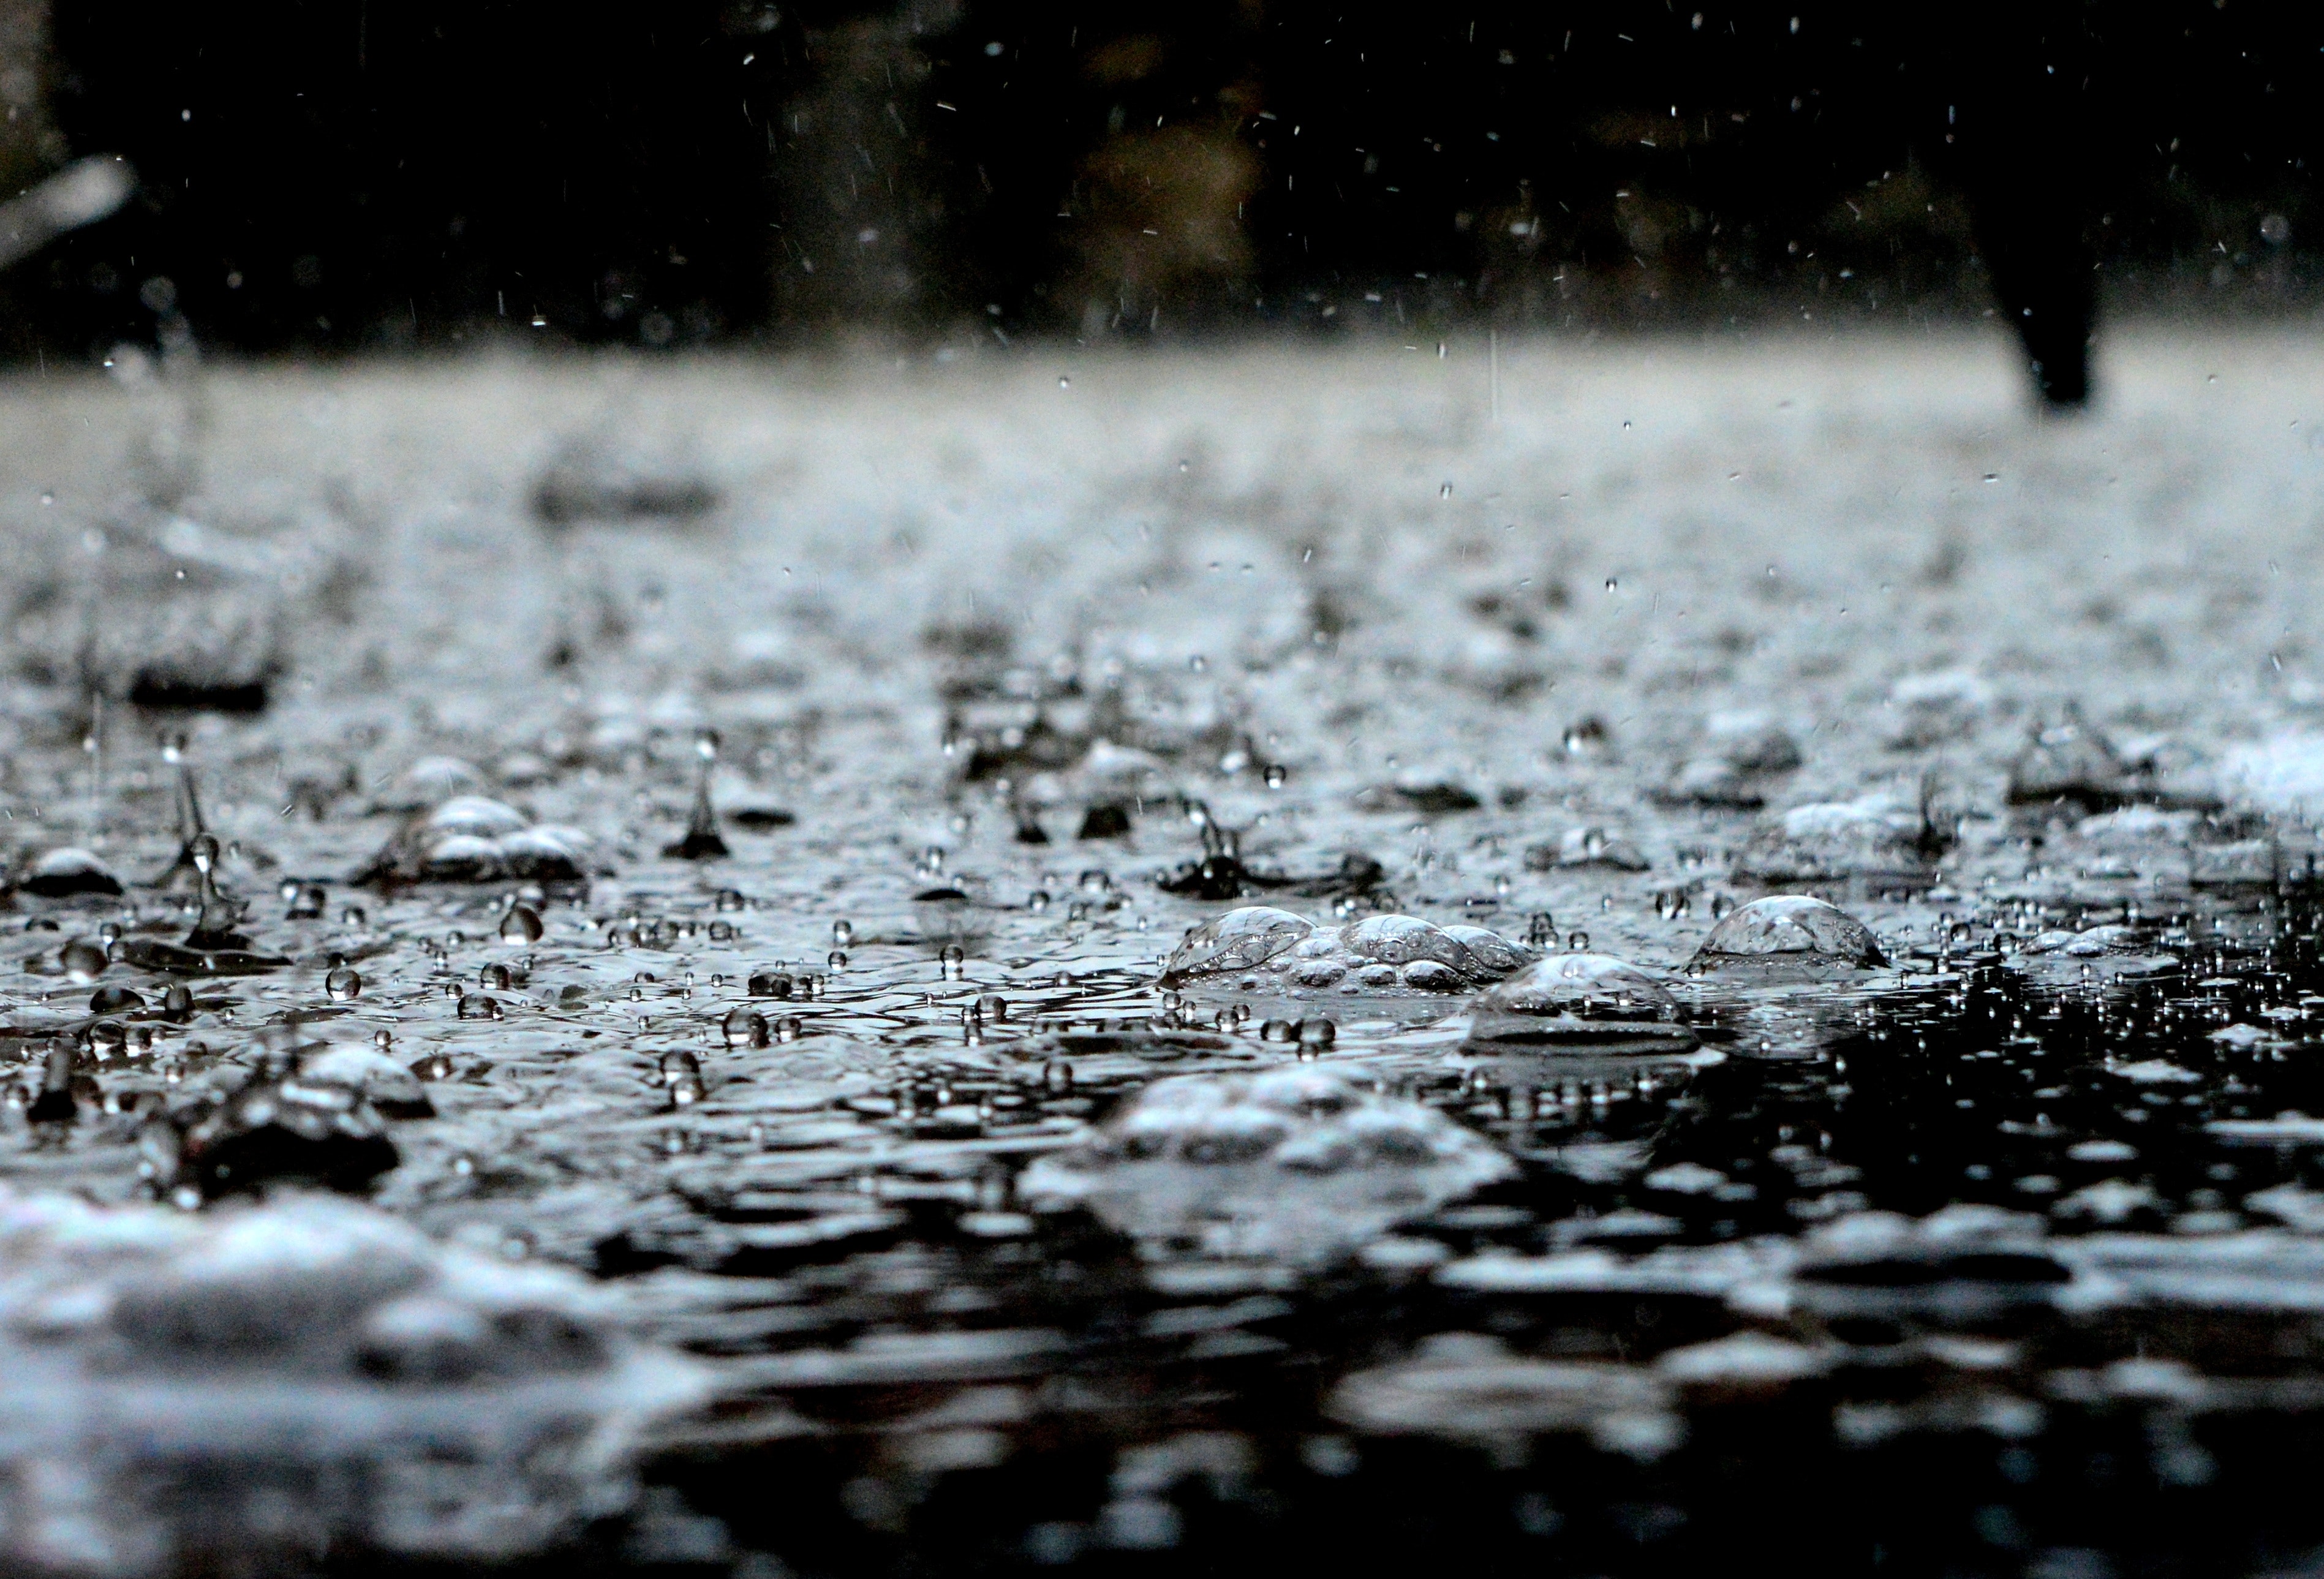 Rain drops, representing flooding in a residential basement